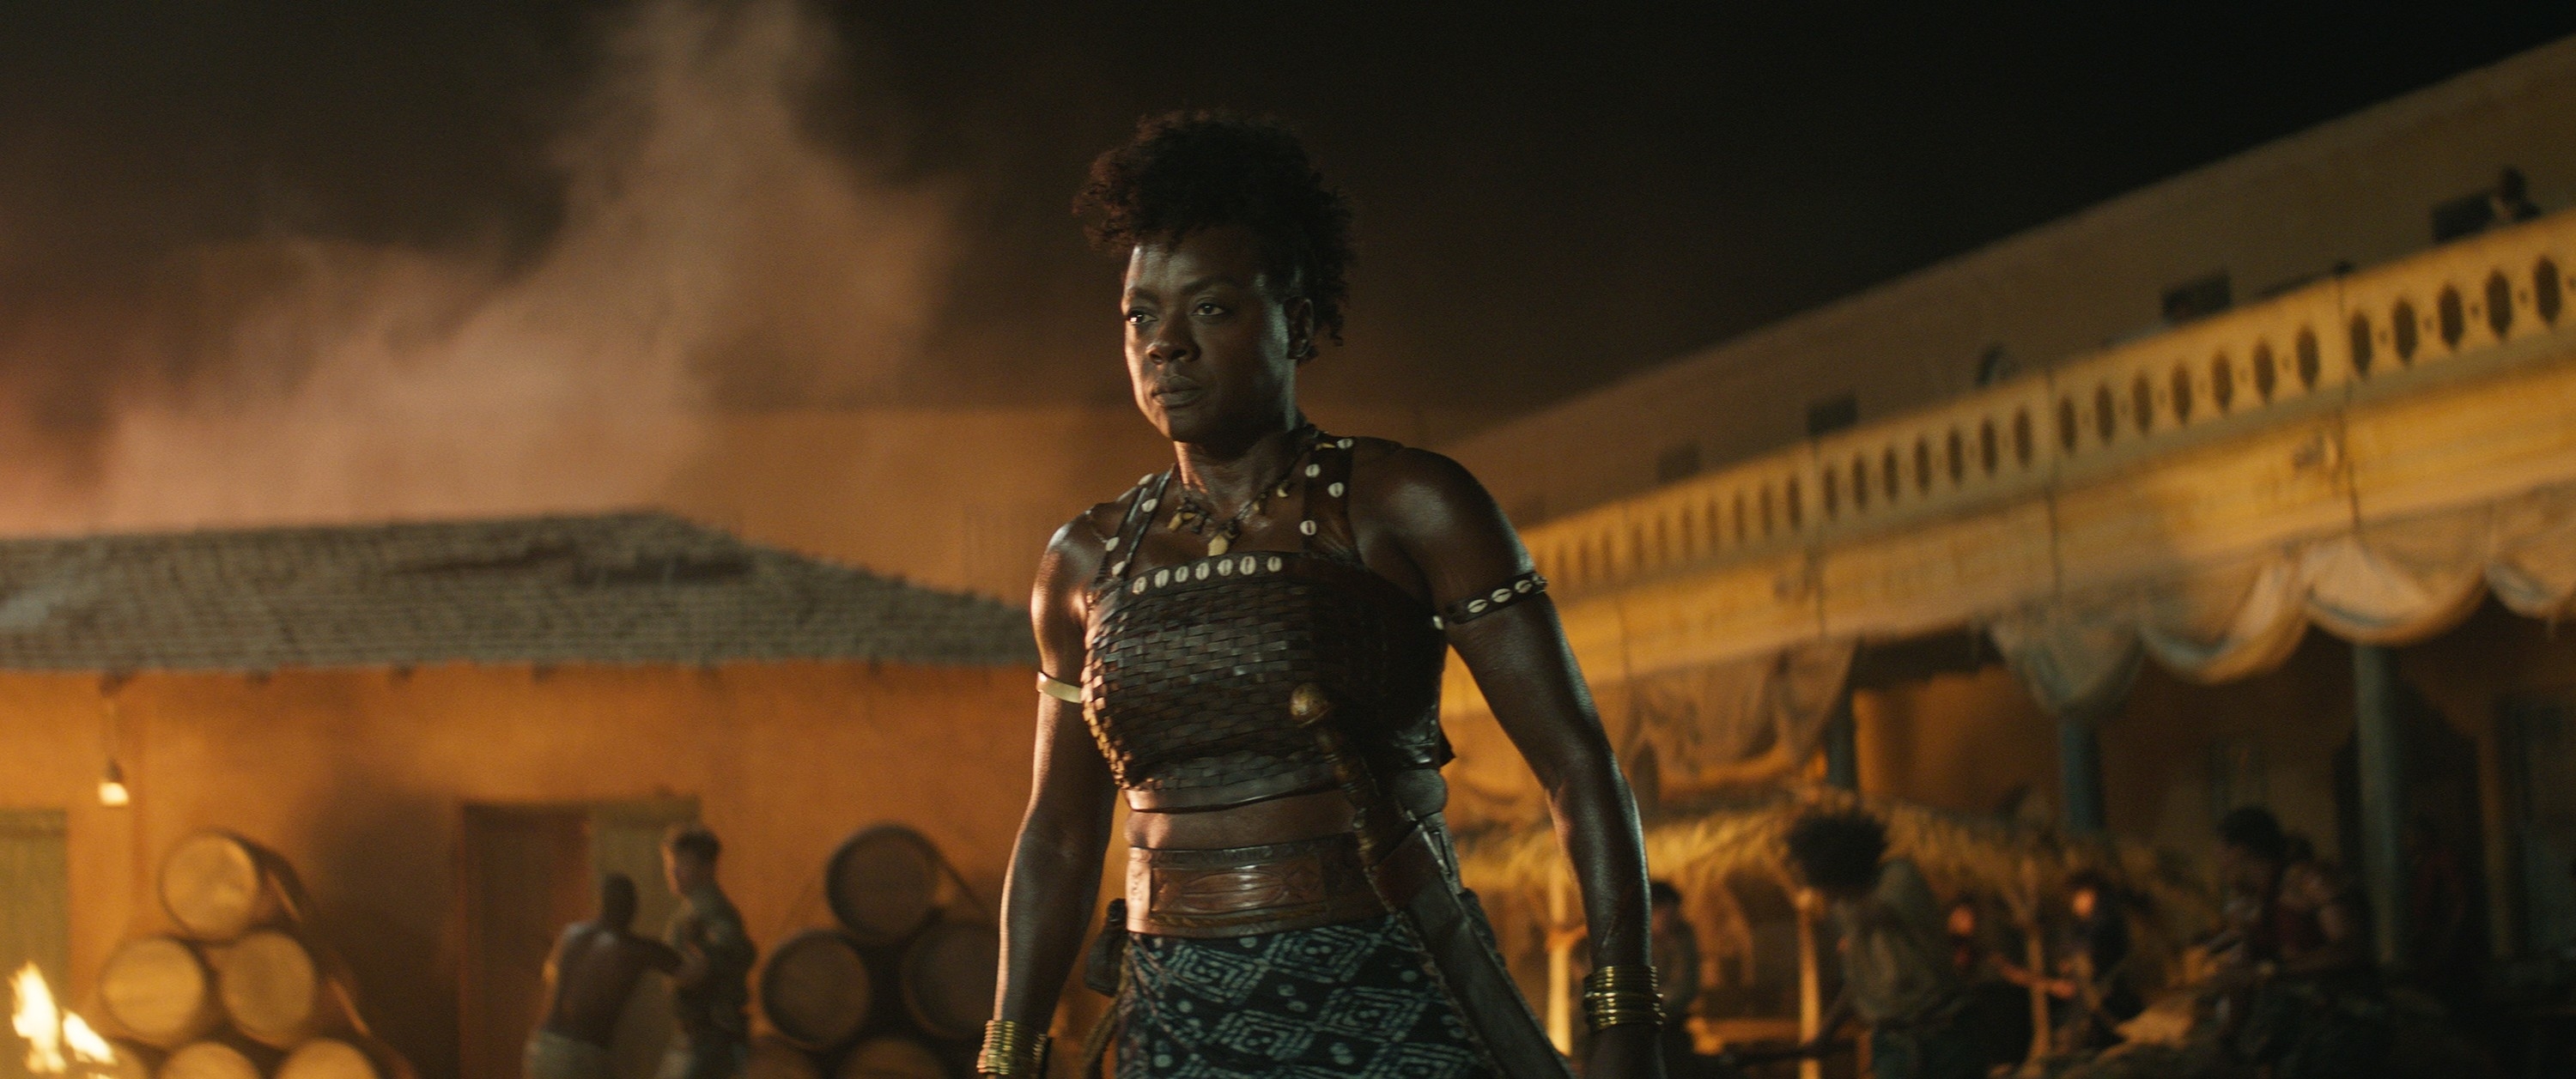 Viola Davis in traditional warrior attire stands confidently in a bustling village setting at night